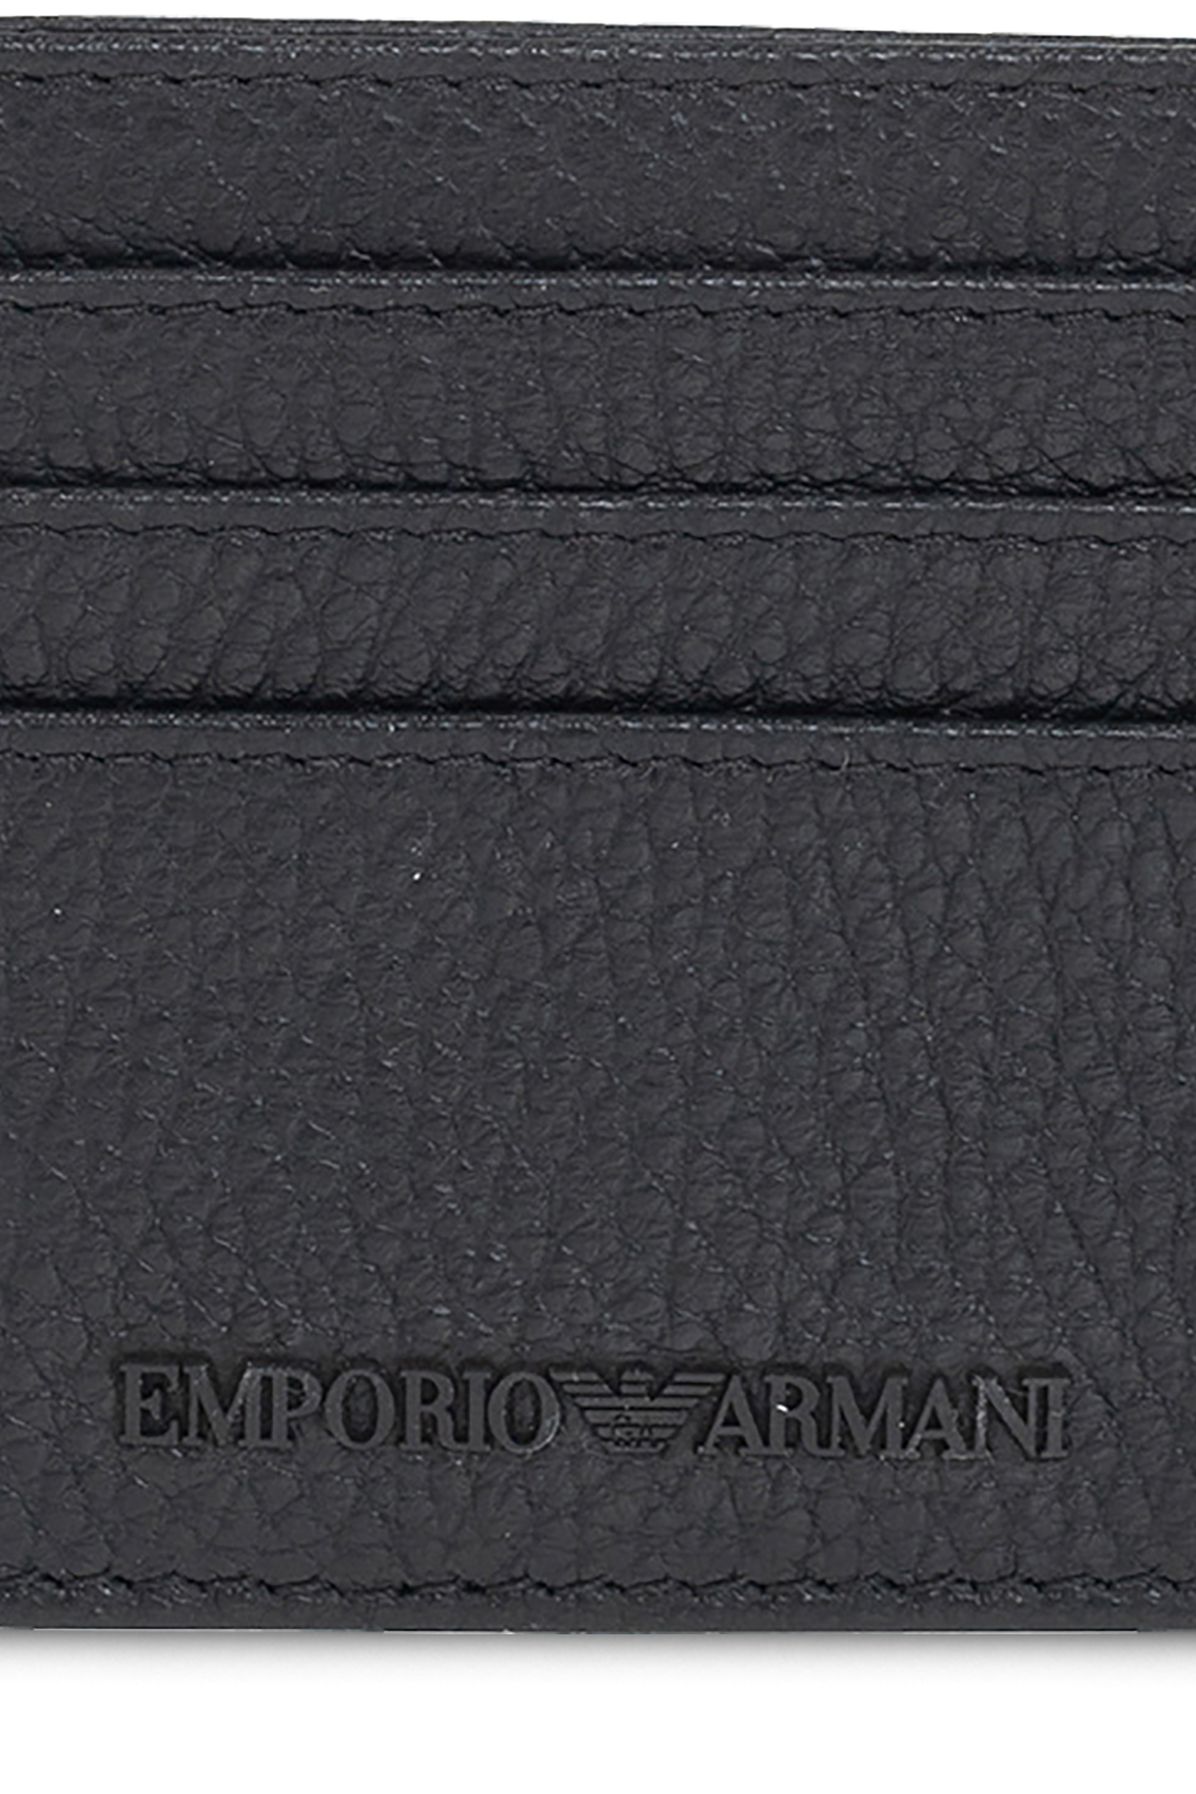 Emporio Armani Card holder with keyring